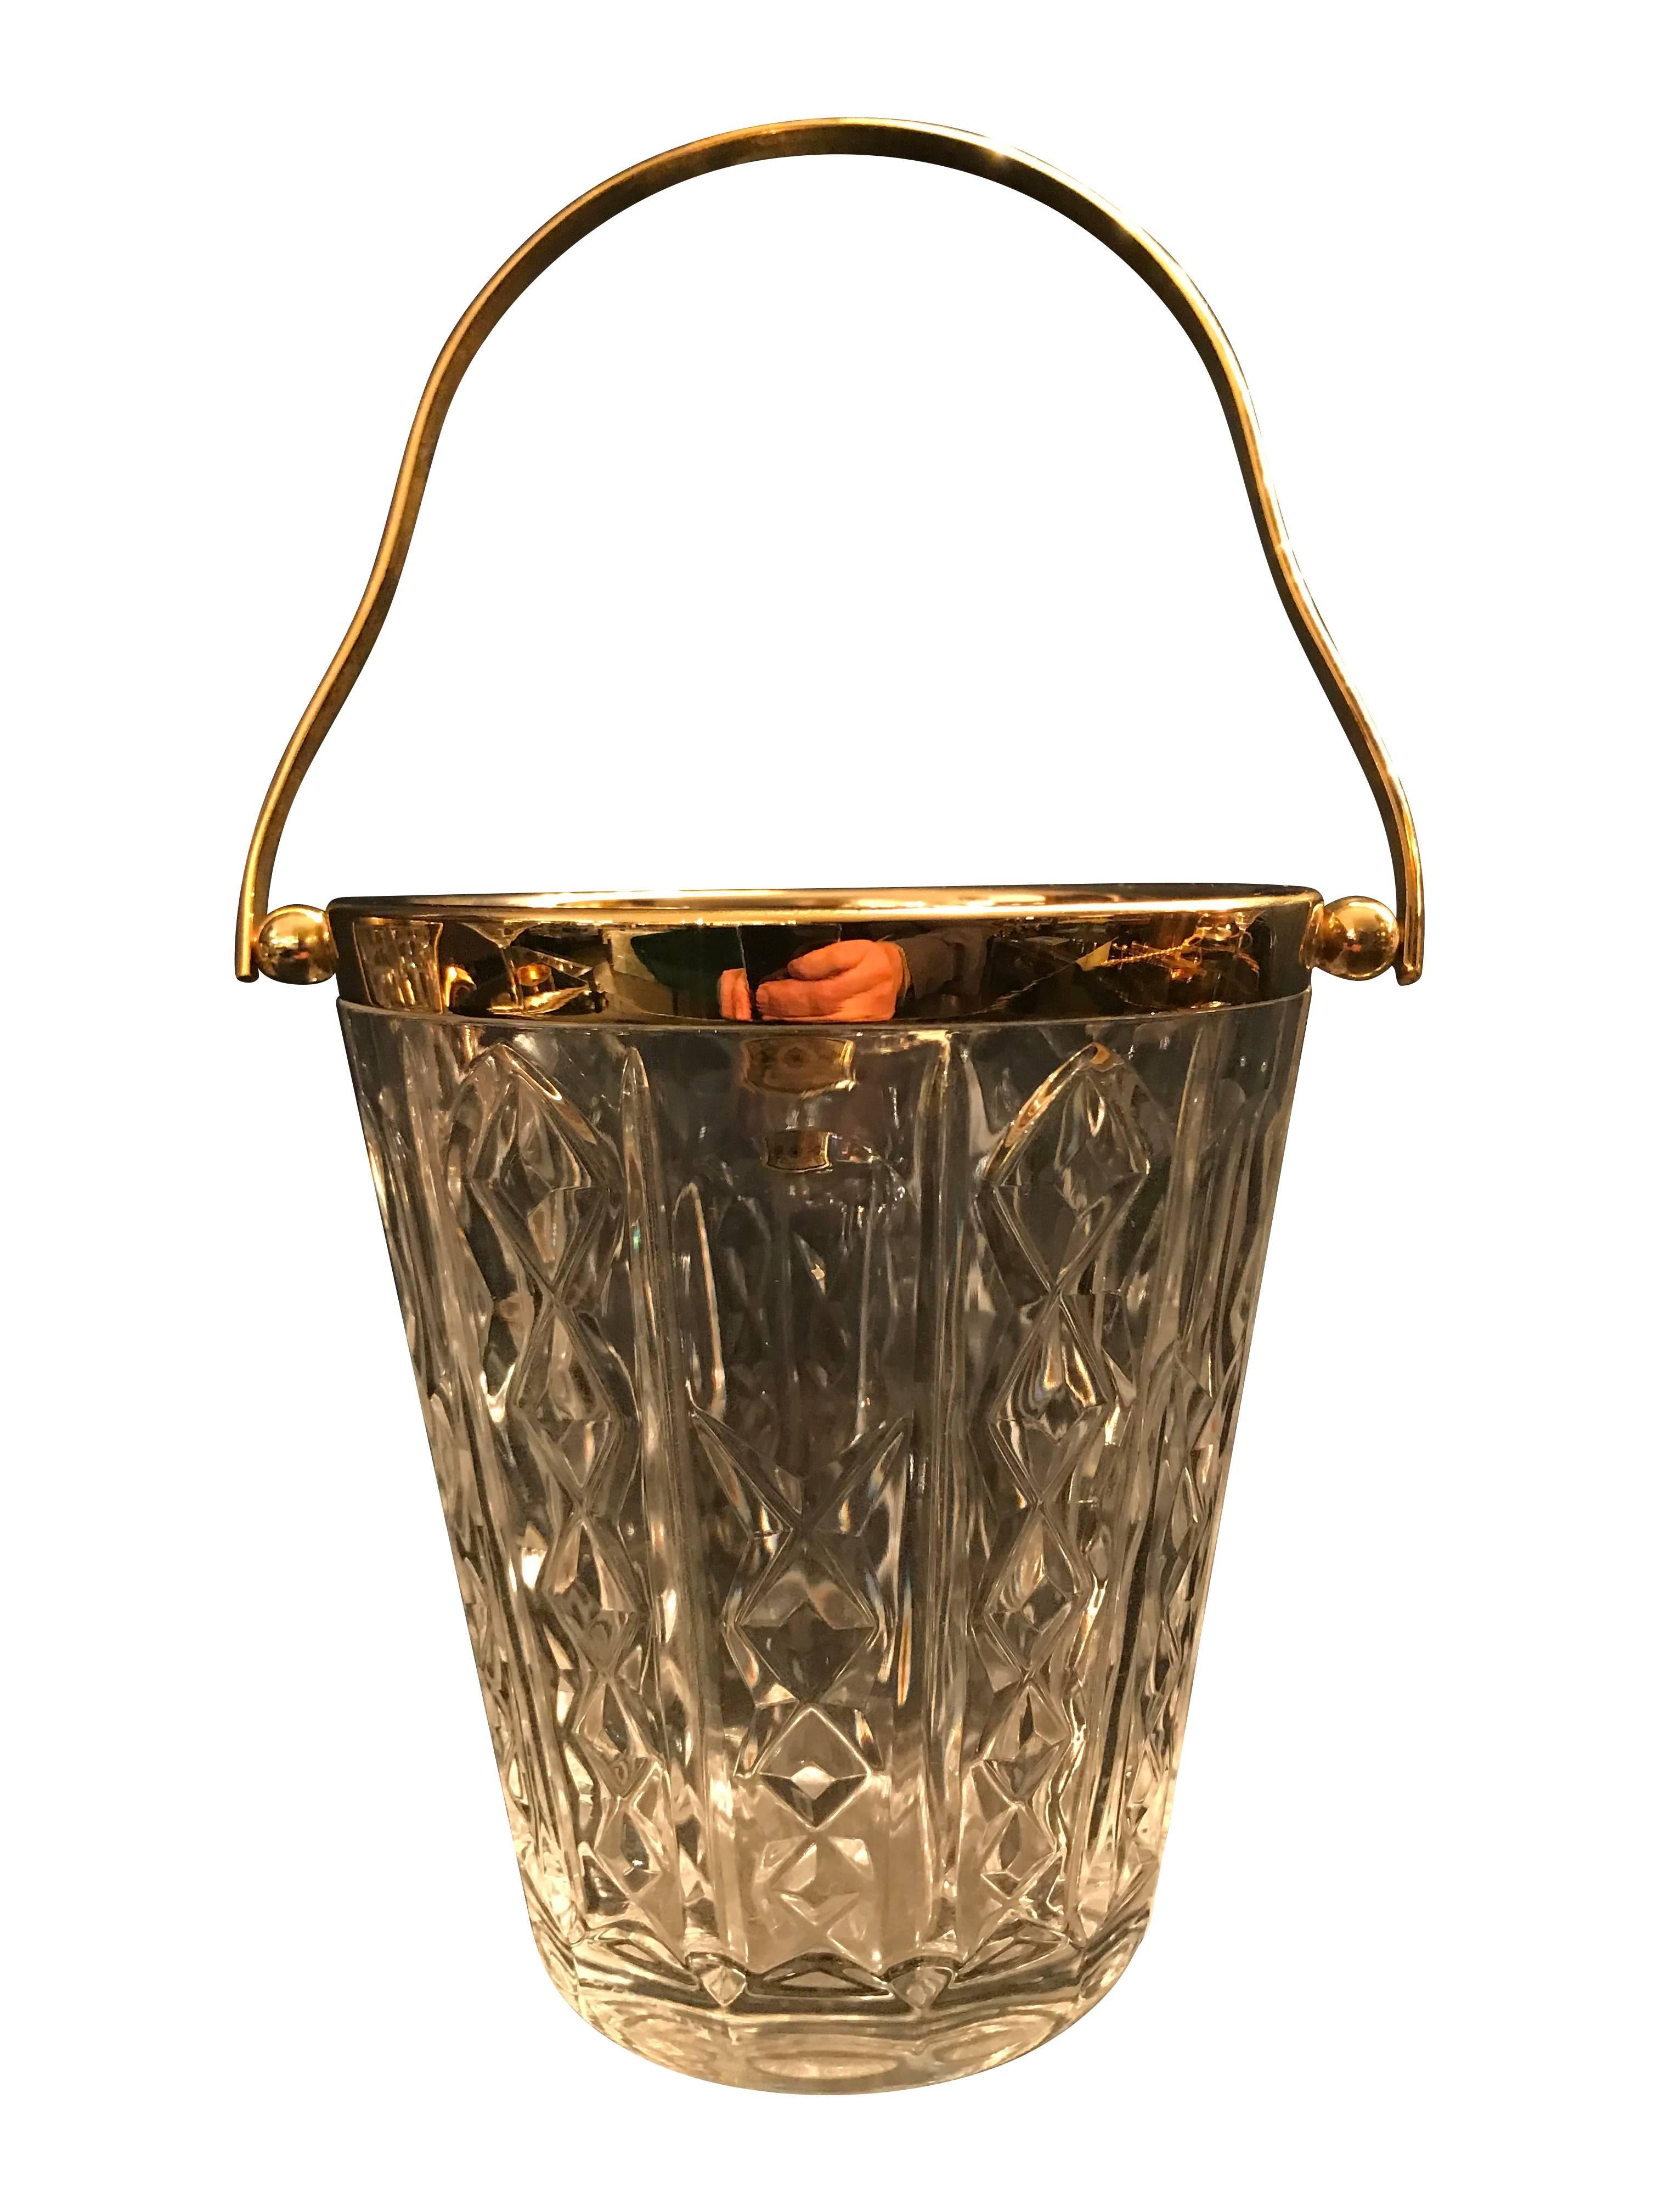 A Val St Lambert crystal ice bucket with gold leaf handle and rim. Stirrer and ice grabber in one photo not included in this sale. All can be mixed and matched to make great gift sets with glasses and other cocktail accessories.